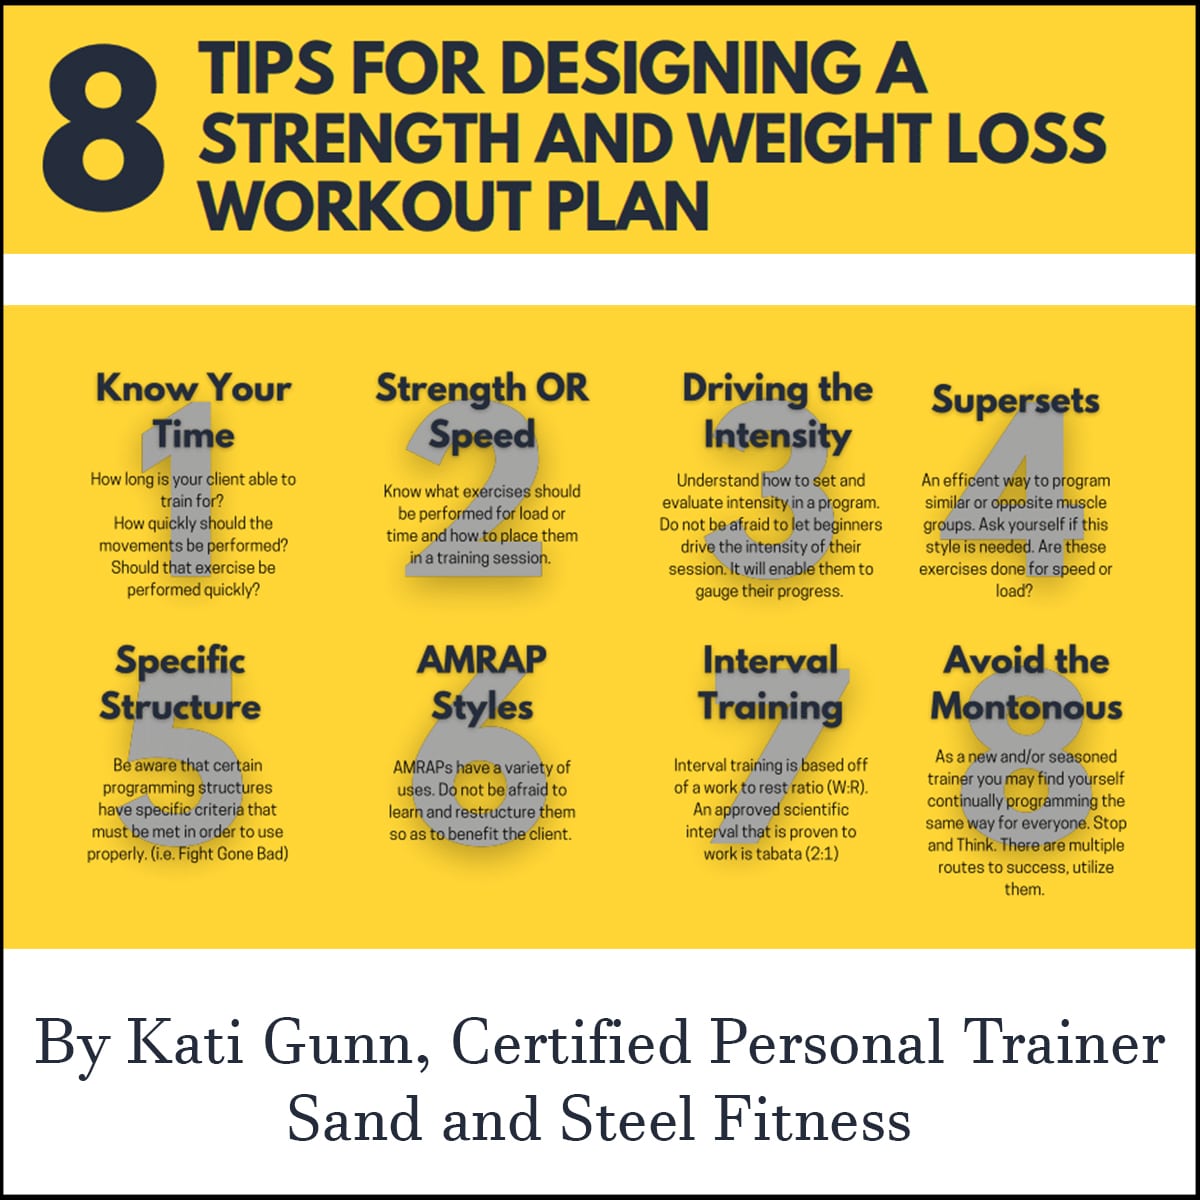 8 Tips for Designing Strength and Weight Loss Programs Final 3